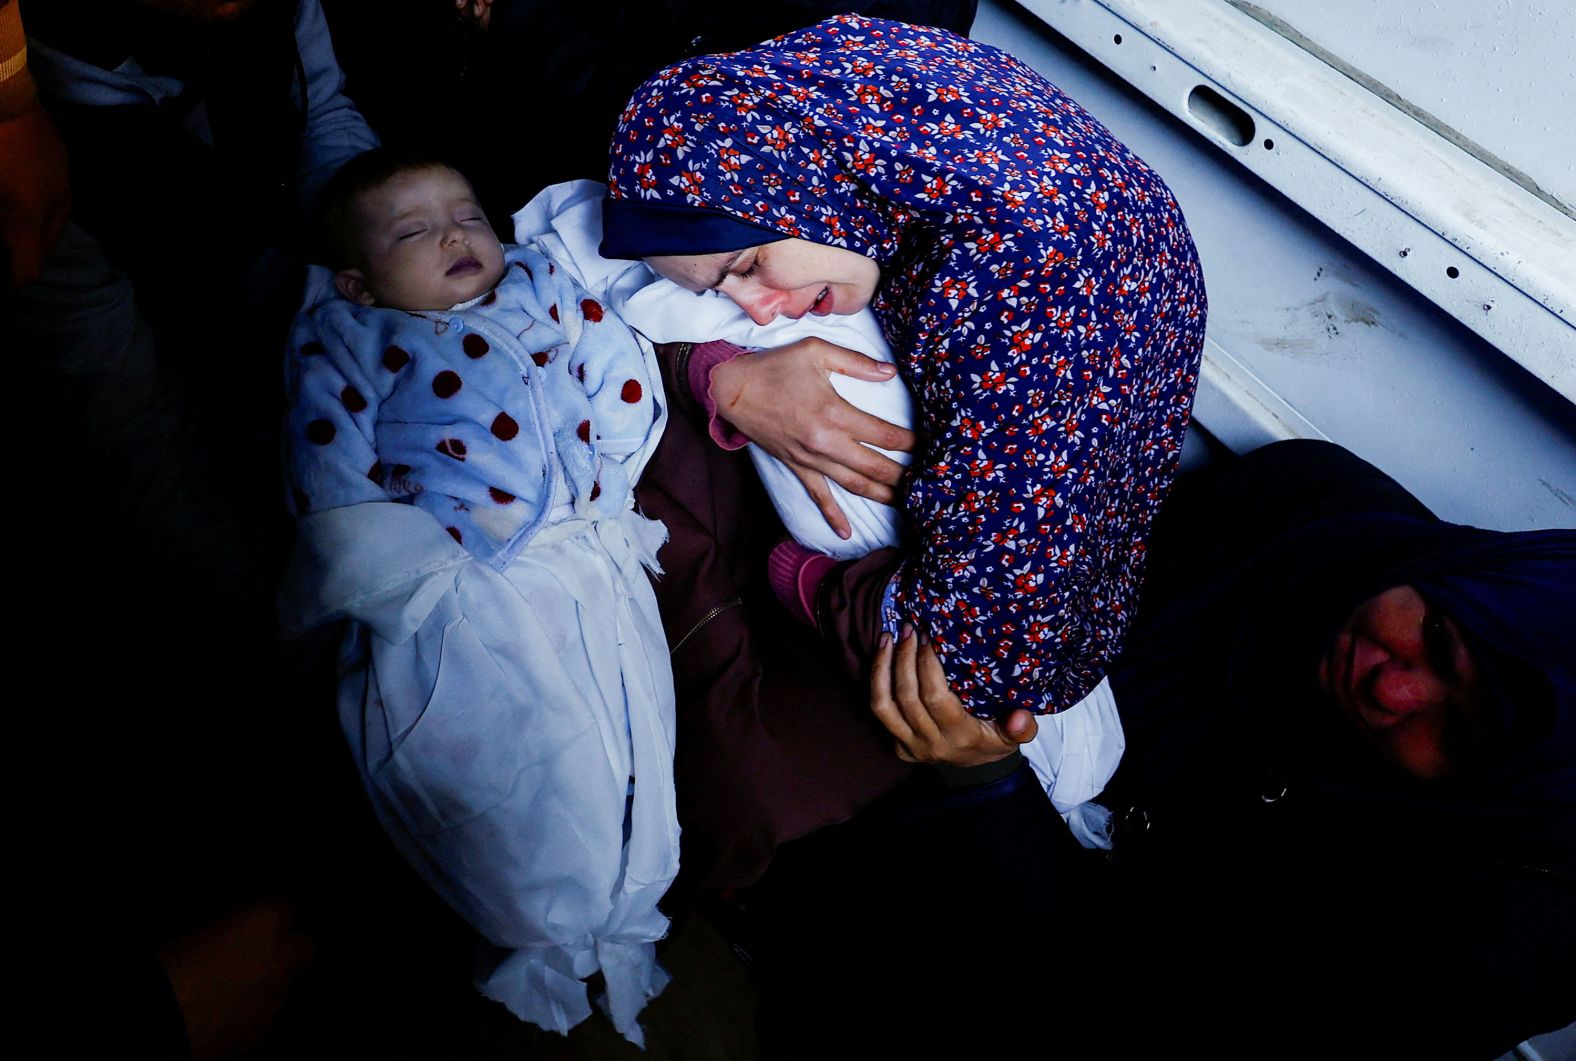 Rania Abu Anza holds one of her 5-month-old twins who were killed when an Israeli strike hit their house in Rafah, Gaza, on Sunday, March 3. Abu Anza's husband and at least 11 other relatives were killed when the house collapsed. "I screamed for my children and my husband," she said, <a href="index.php?page=&url=https%3A%2F%2Fapnews.com%2Farticle%2Fisrael-hamas-war-children-twins-killed-gaza-25282b273b92aec7fc75c3212f8d8e3f" target="_blank" target="_blank">according to the Associated Press</a>. "They were all dead. Their father took them and left me behind." It took Abu Anza and her husband 10 years and three rounds of in vitro fertilization to become pregnant.